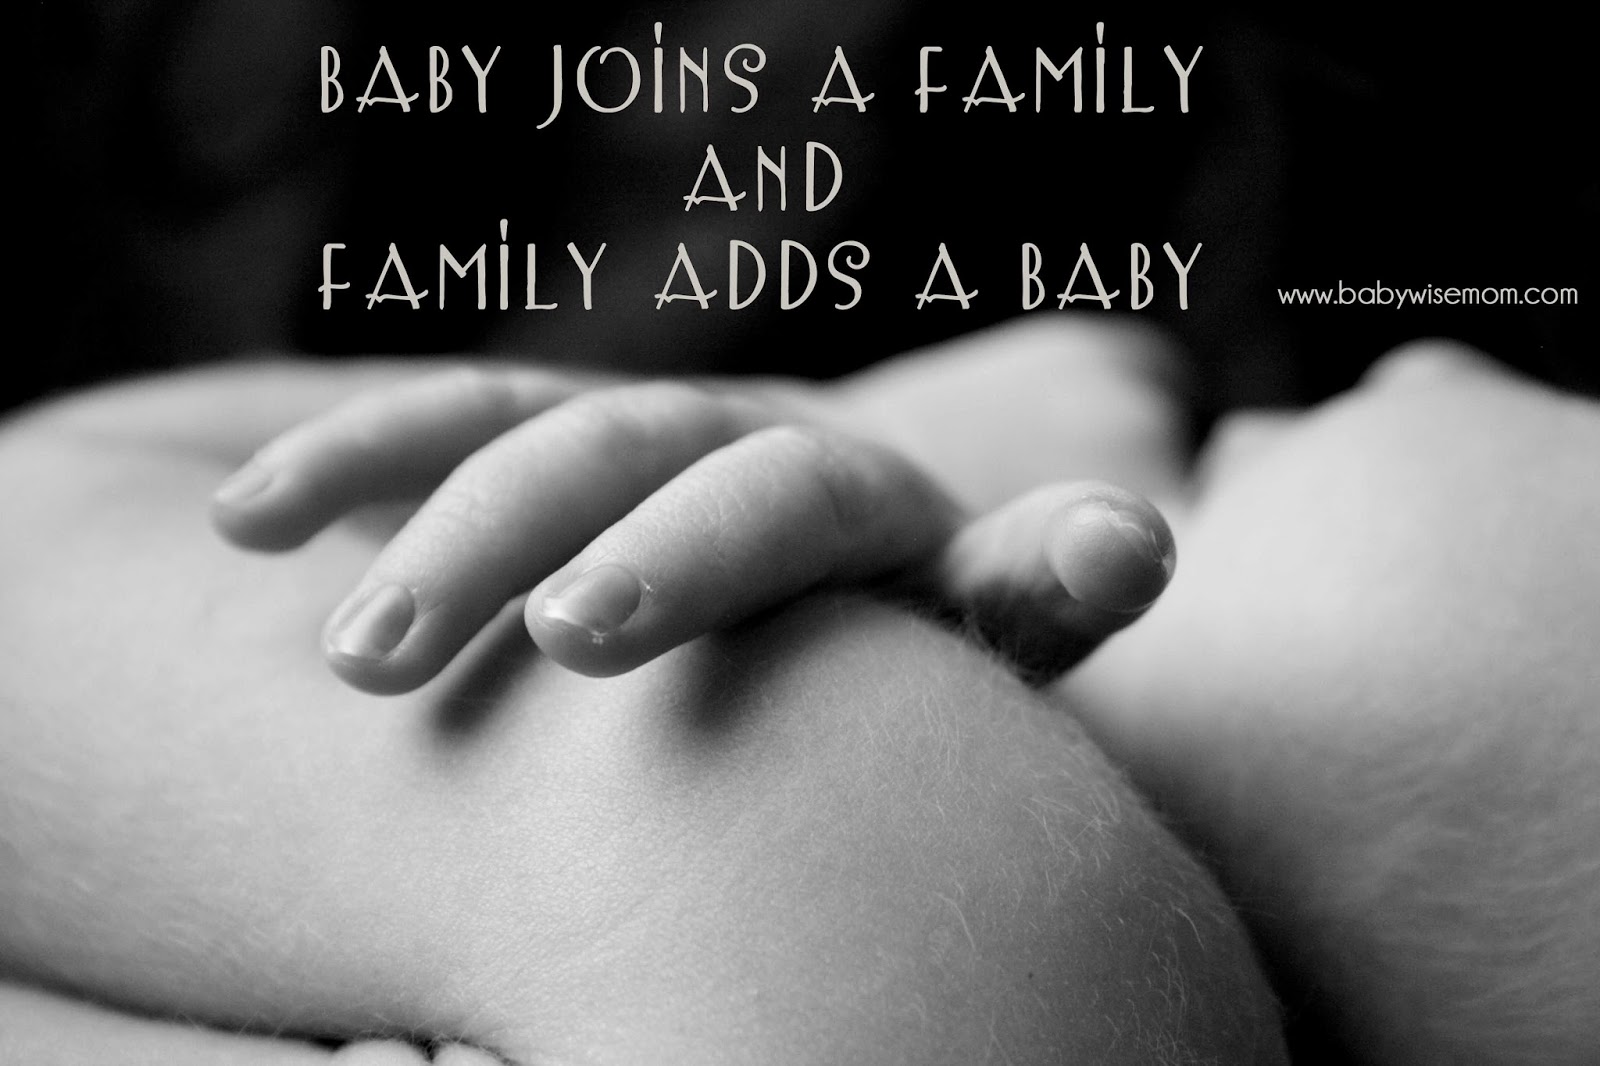 Baby Joins a Family {AND} Family Adds a Baby - Chronicles of a Babywise Mom